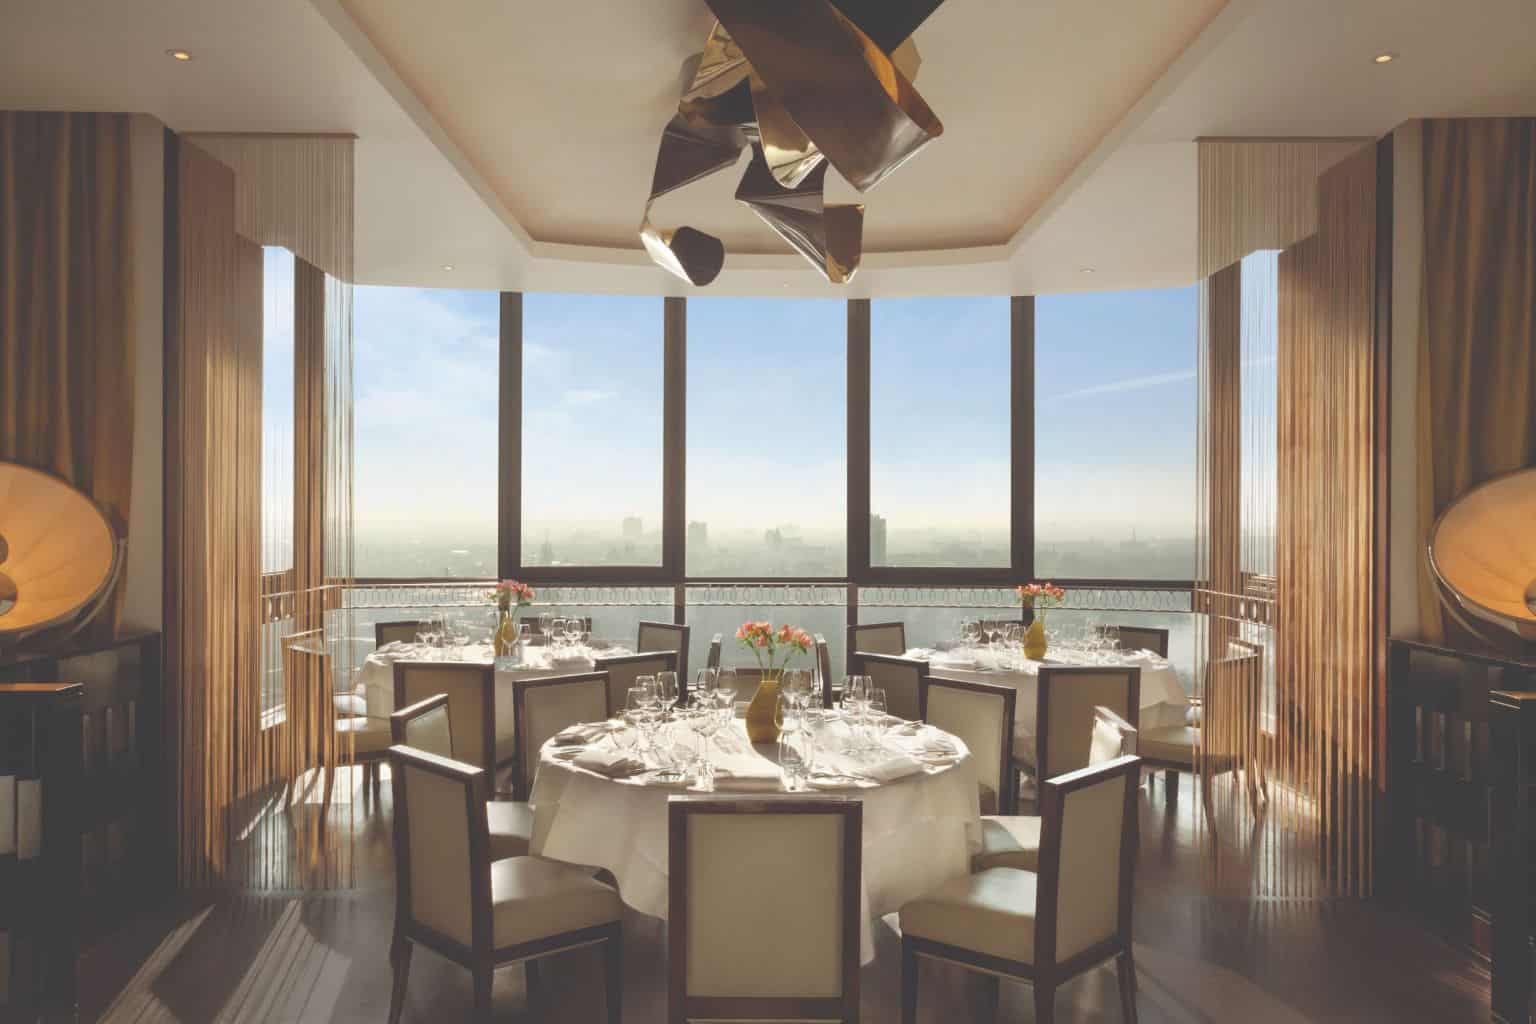 Galvin at Windows launches ‘Friday Horizons’ – a music and dining experience